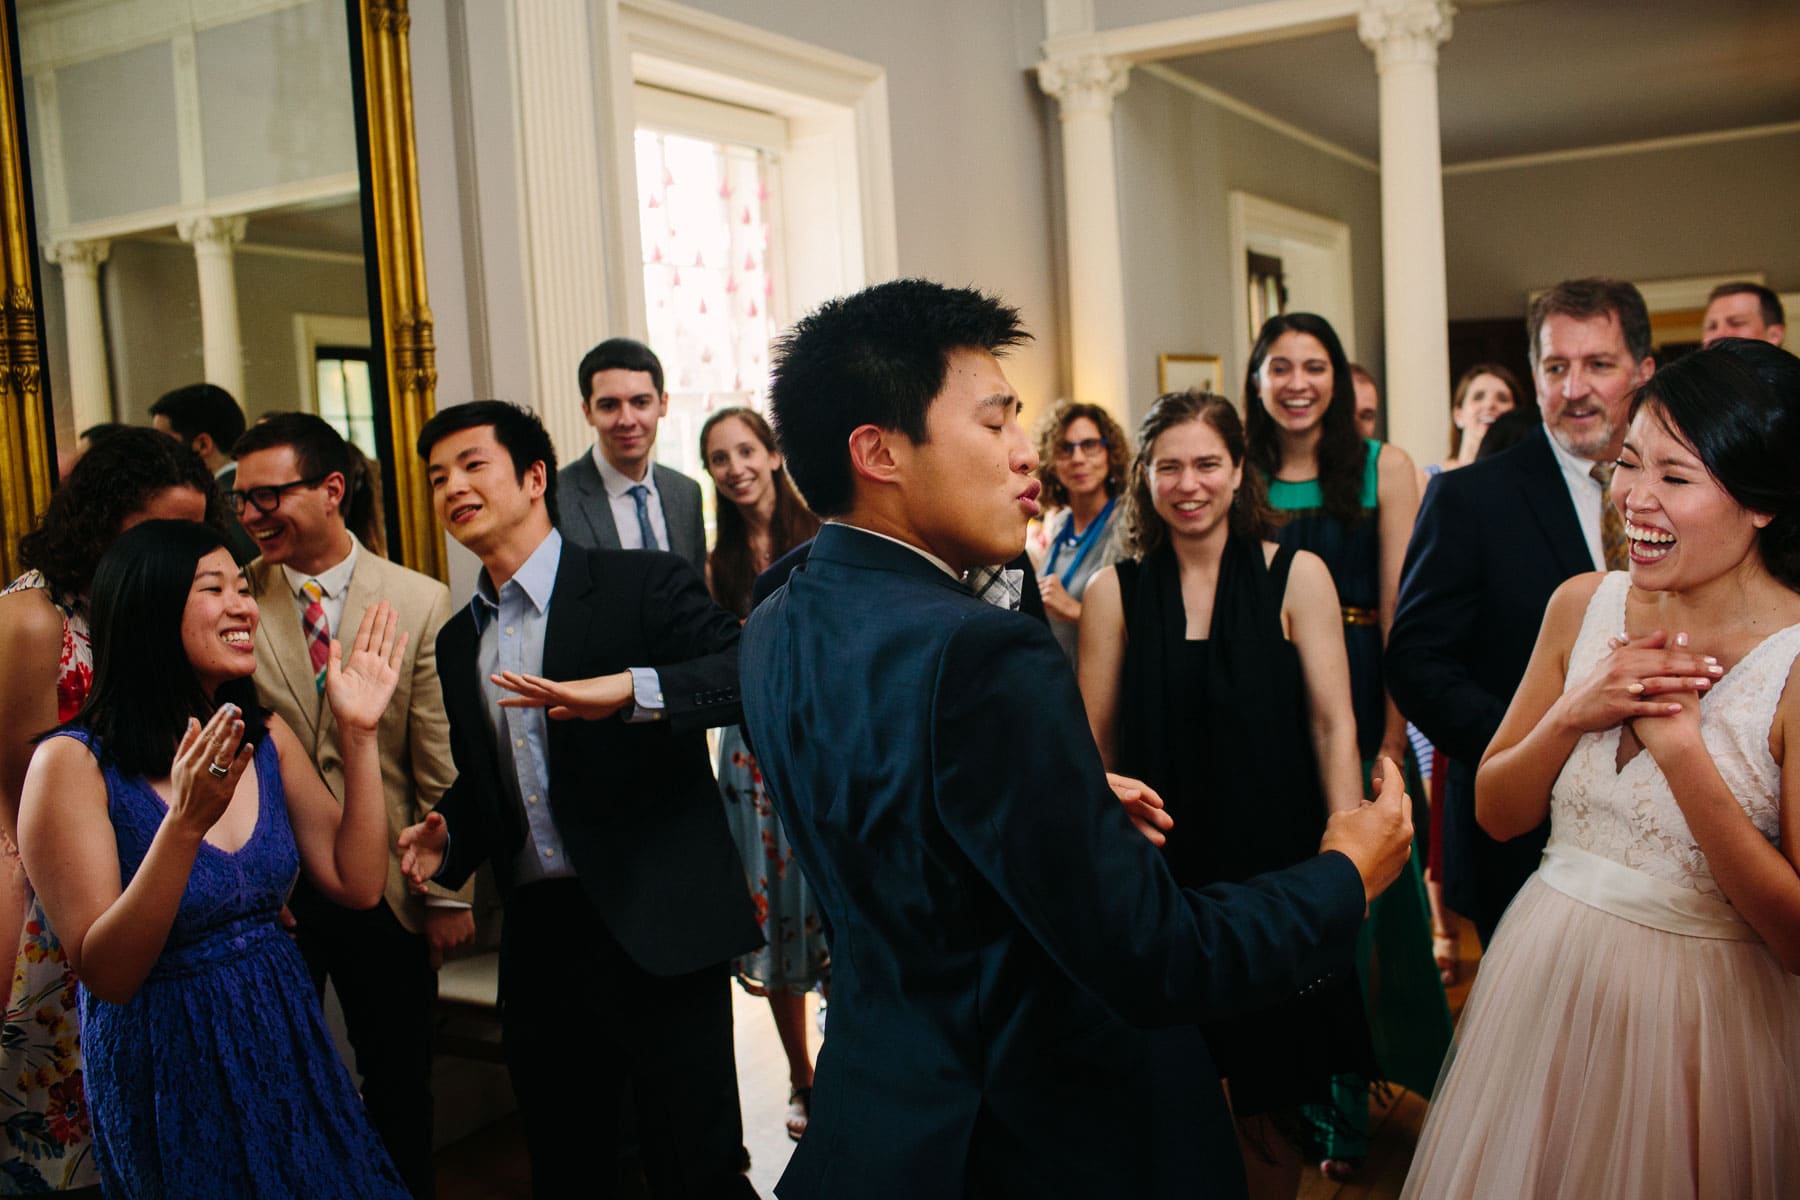 guests dance in the ballroom of the Lyman Estate